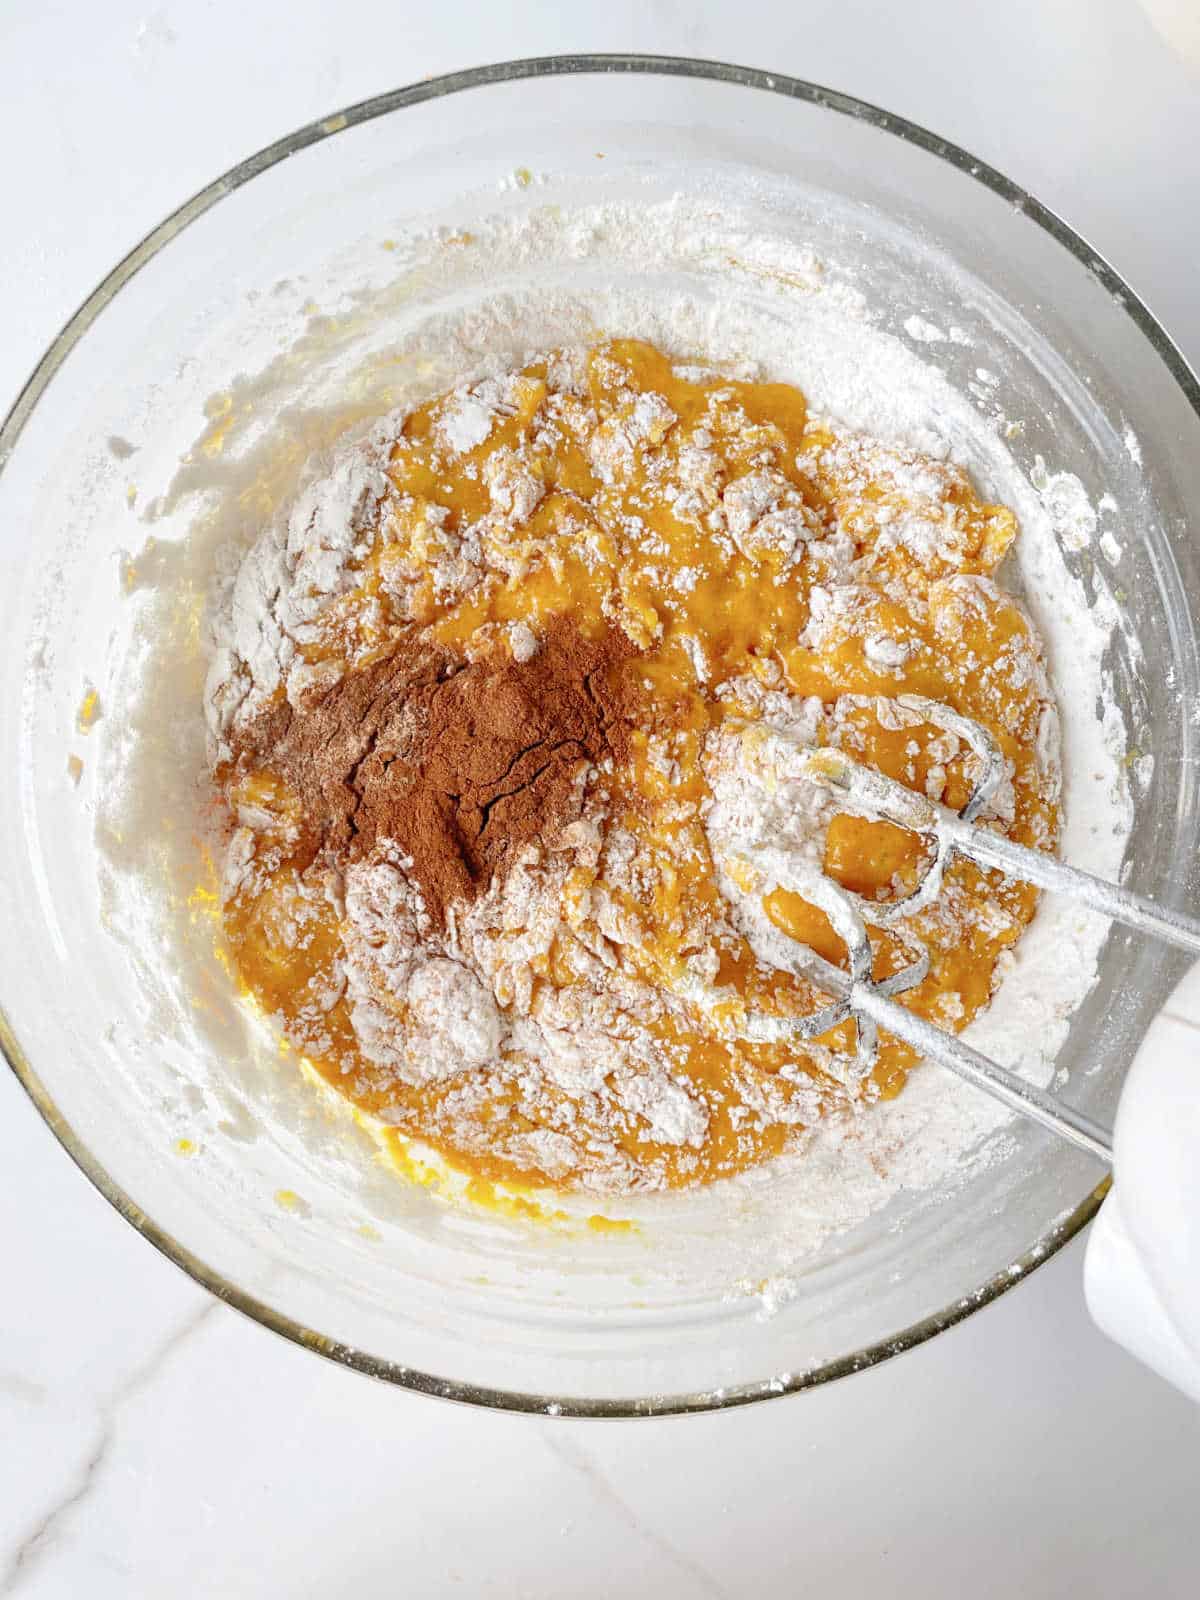 Pumpkin batter with flour and spices in a glass bowl and an electric mixer. White marble surface.